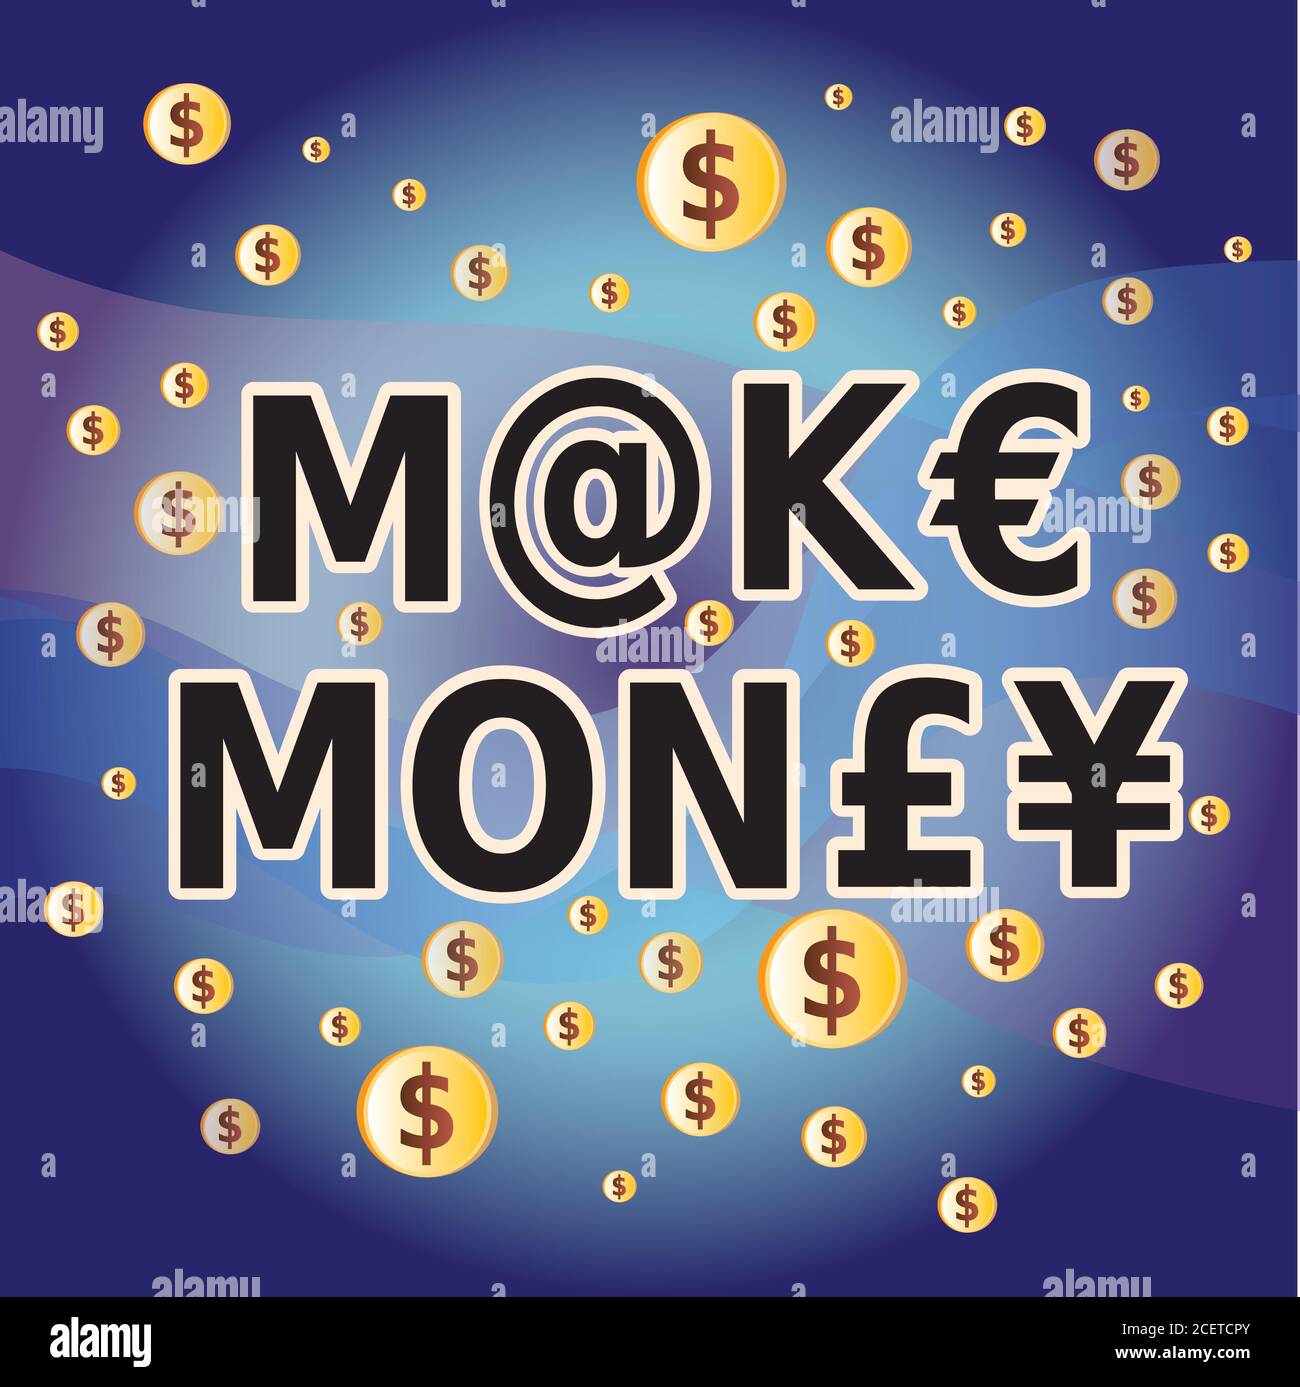 Make Money Quote - Letter and Money Currency Symbols in Blue Colors Stock Vector